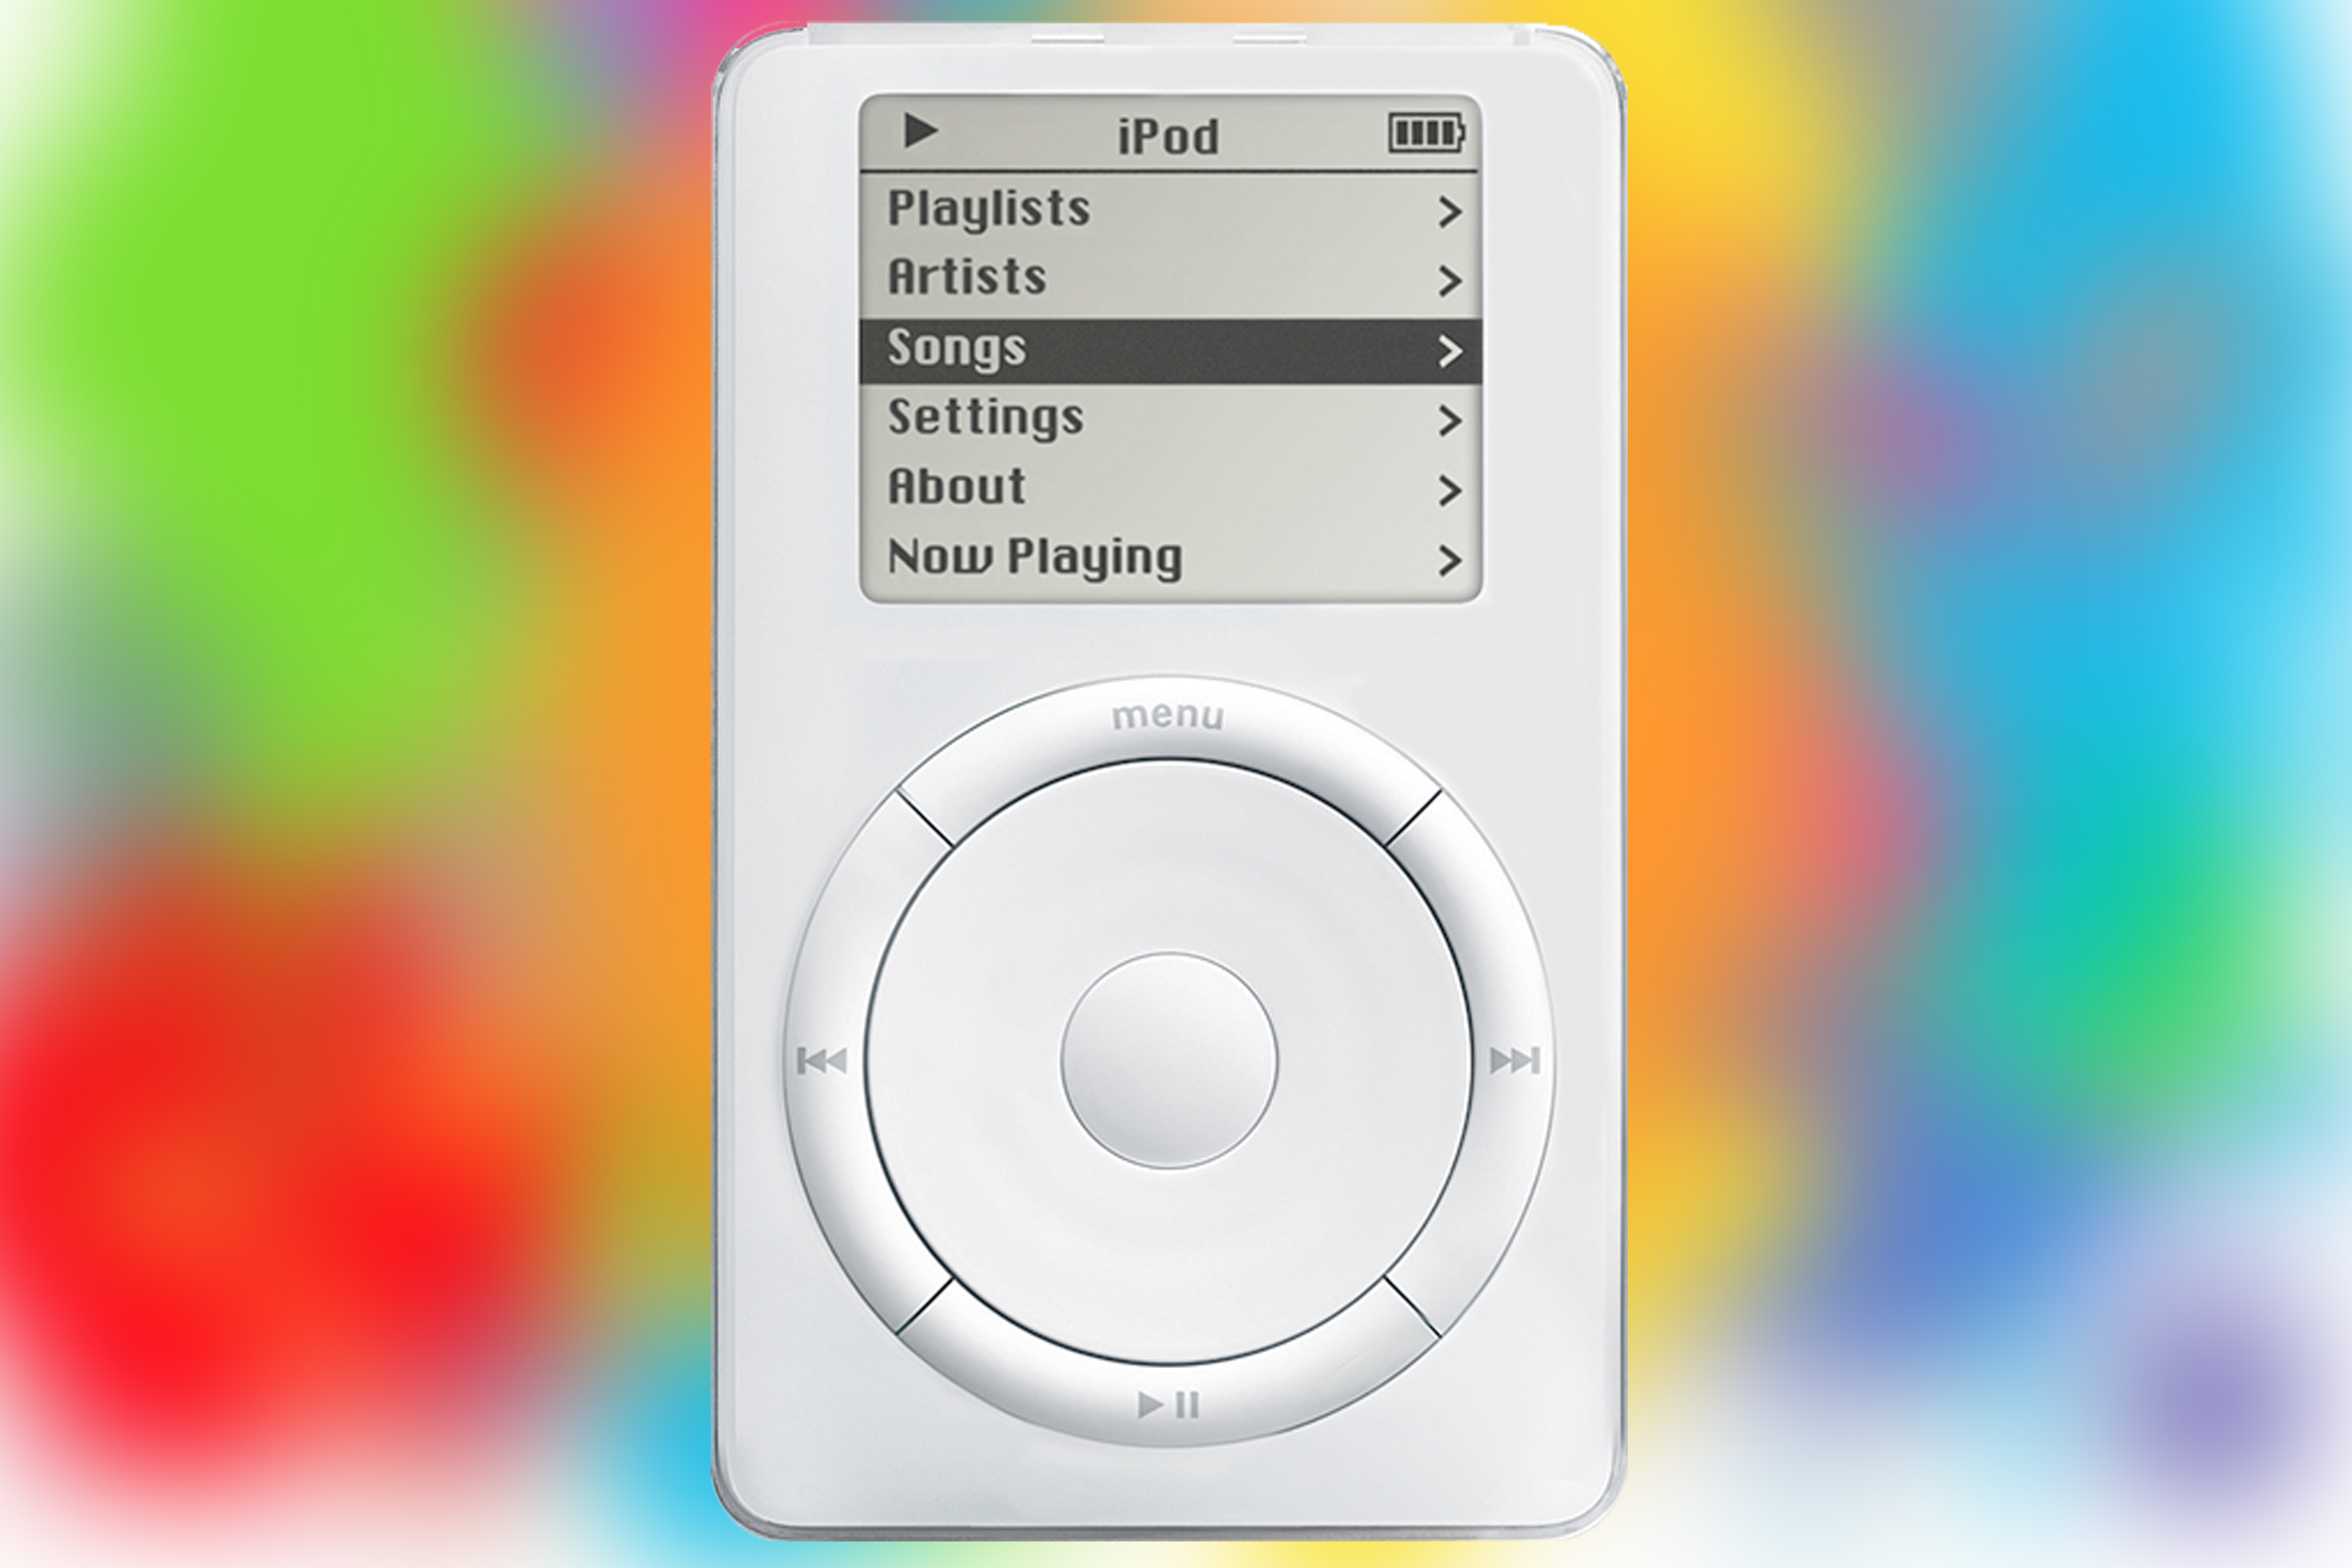 download the last version for ipod ImageRanger Pro Edition 1.9.5.1881